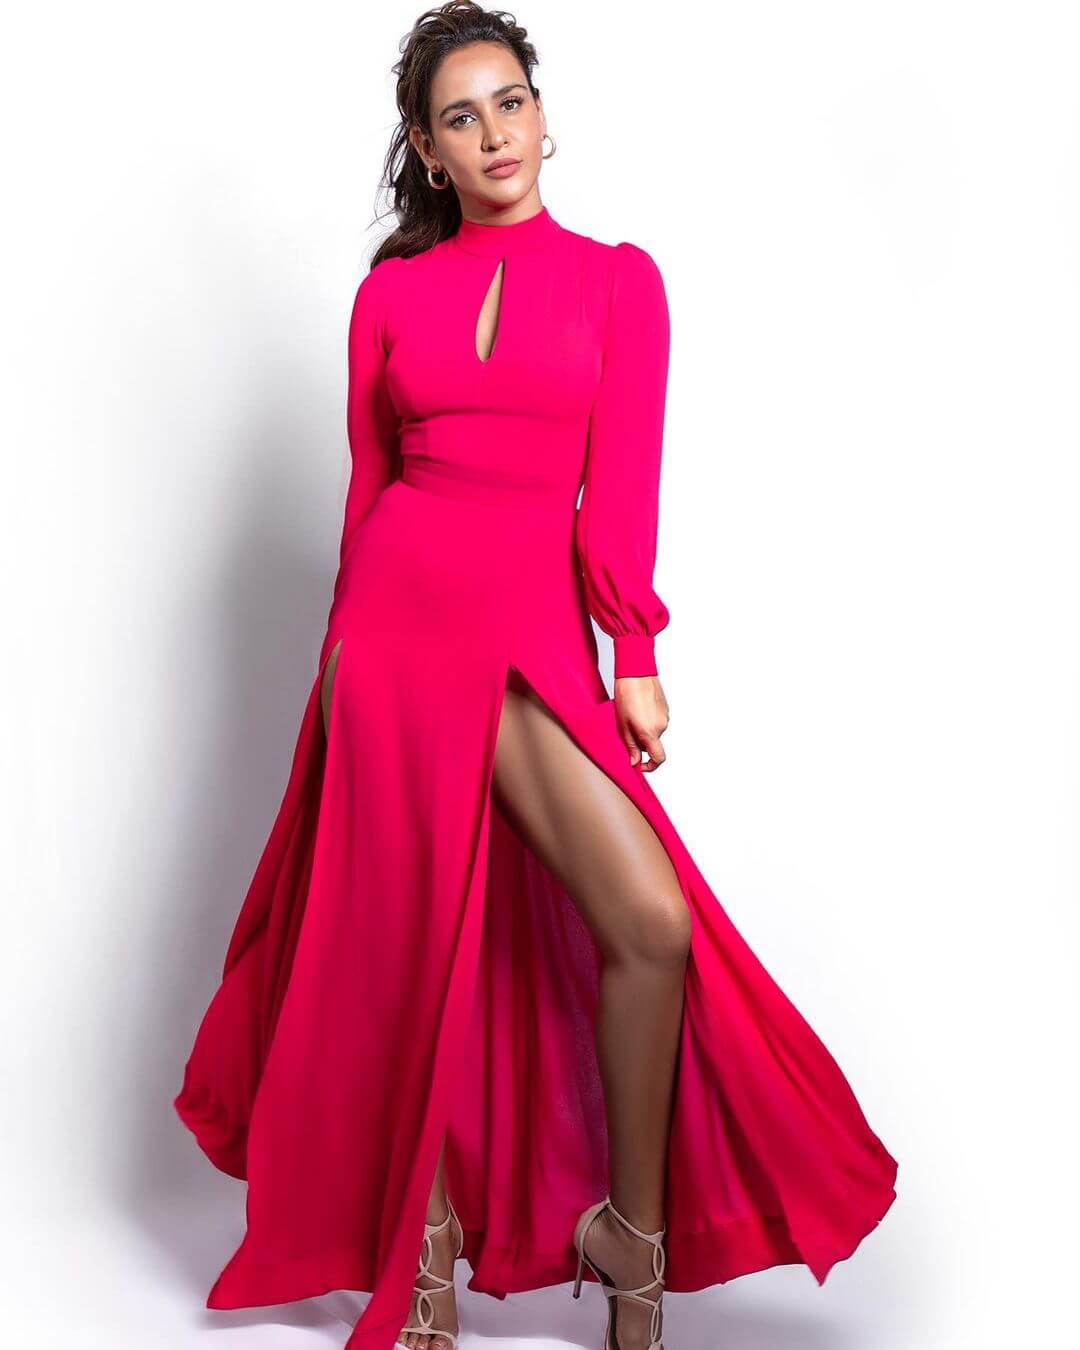 Aisha Sharma Look Beautiful In Pink Full Sleeves Gown Aisha Sharma Chic Looks And Outfit